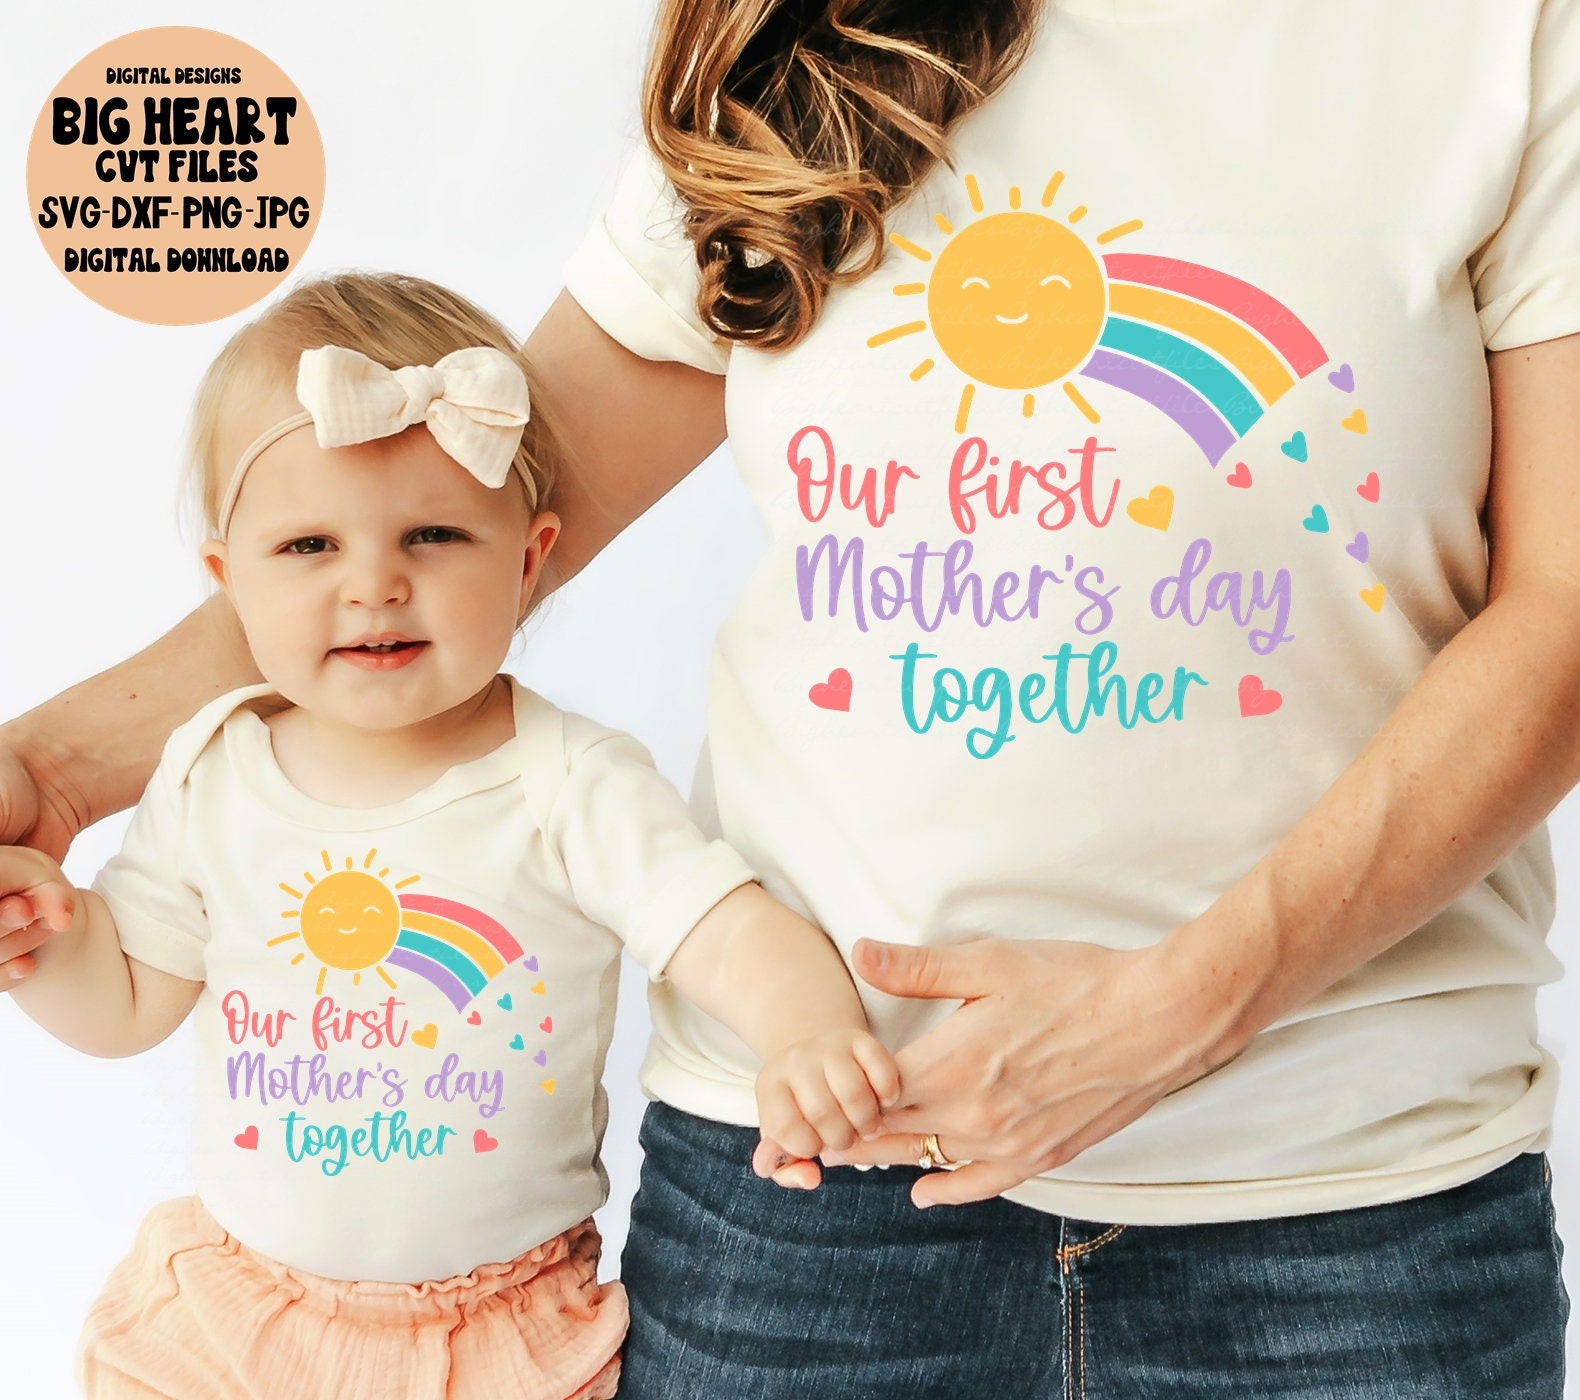 Baby/Toddler Activities Archives - Happily Ever Mom